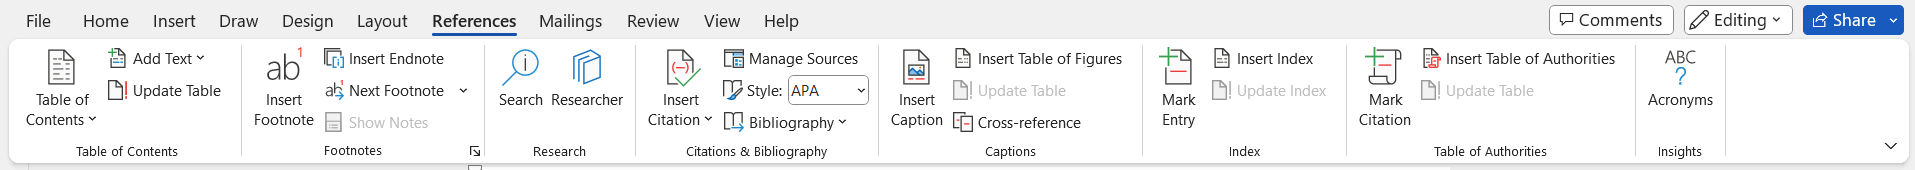 References Tab in MS Word